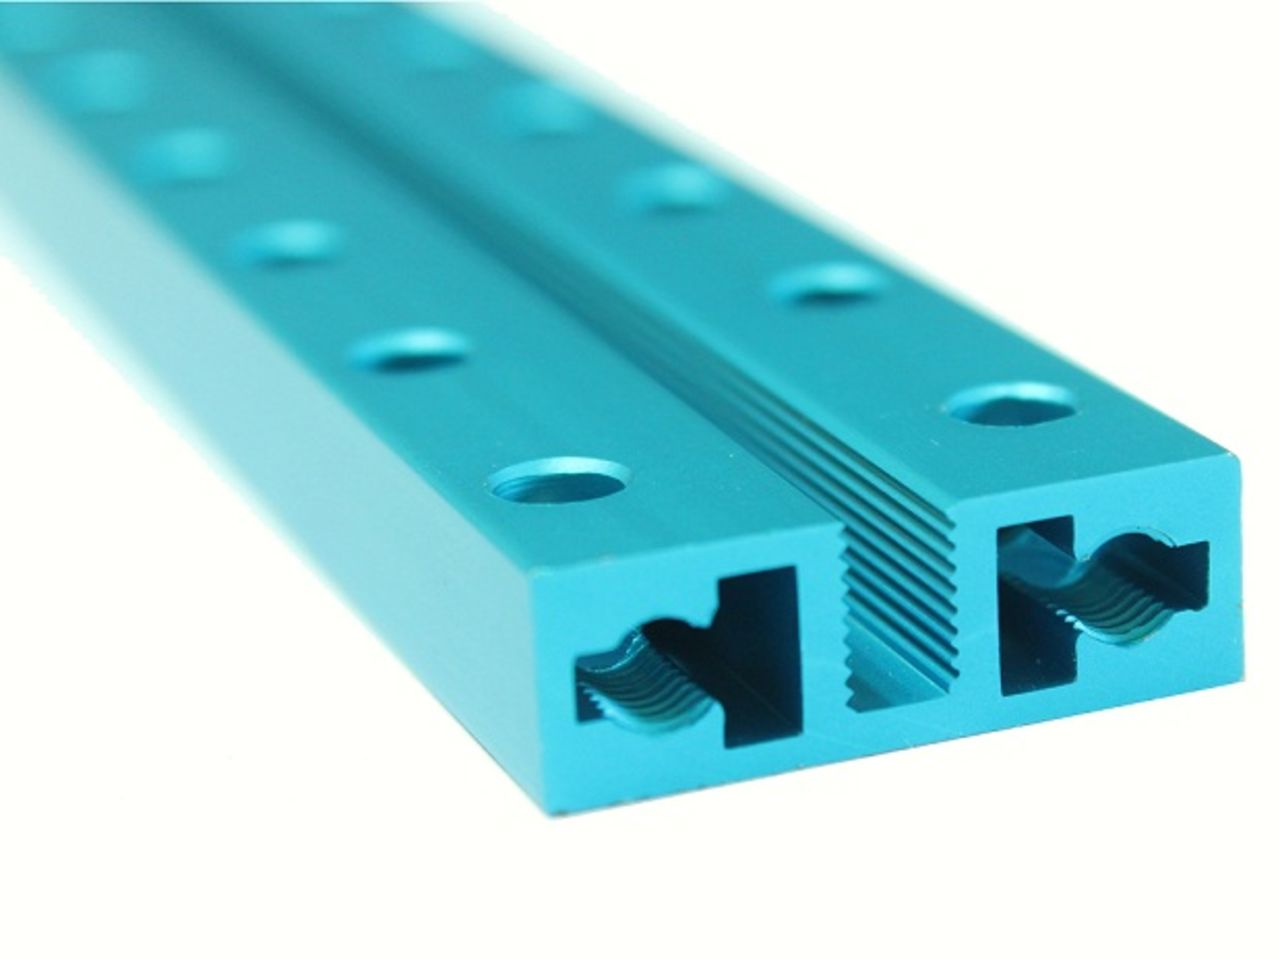 The threaded slot design means you don't need nuts to connect Makeblock modules, and the hole spacing corresponds to that of Lego bricks, making the two compatible. 